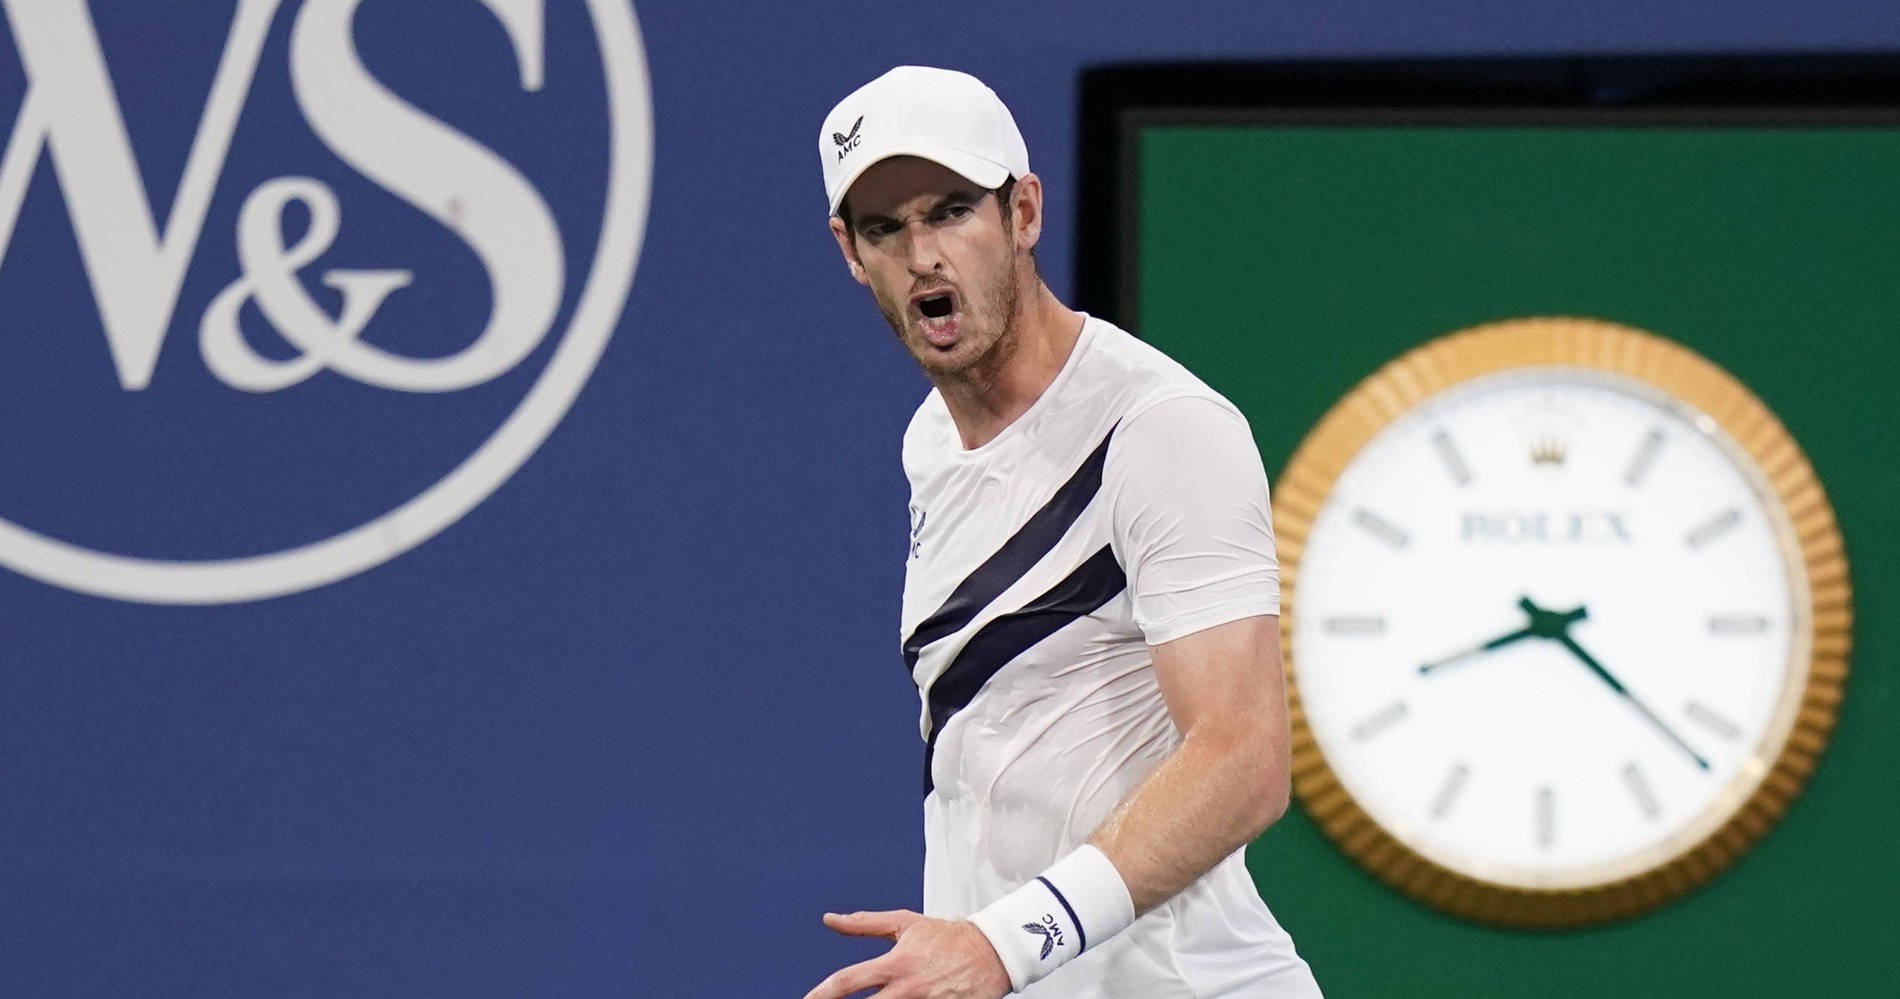 Andy Murray, Western & Southern Open (Flushing Meadows / New York), 2020